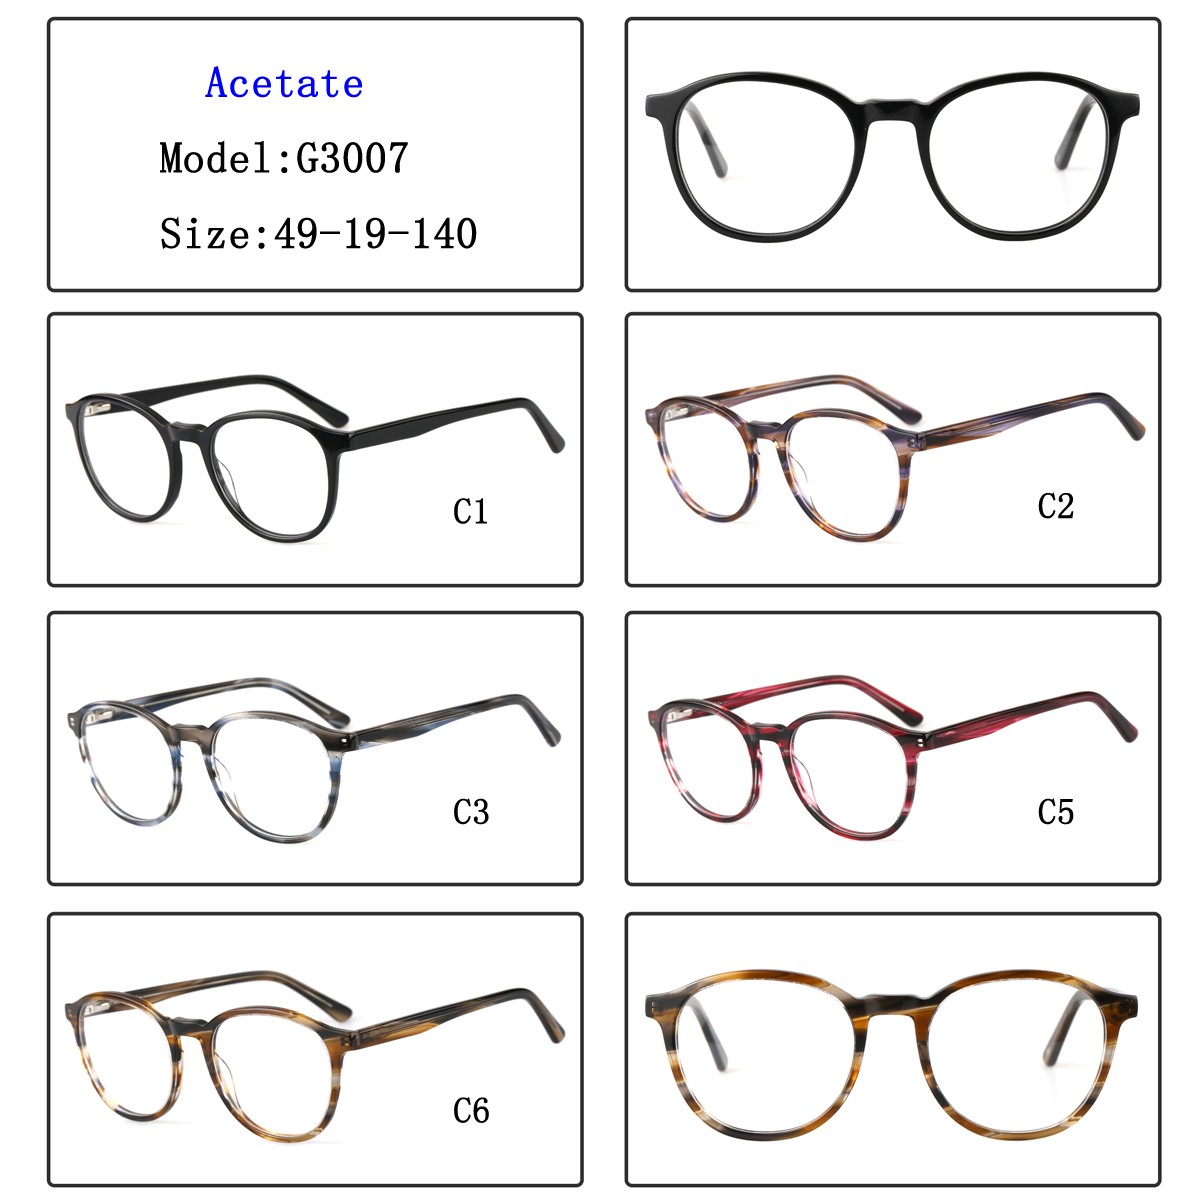 (RTS) GS-G3007 acetate glasses 2021 stock quantity colorful acetate reading glasses with cheapest price